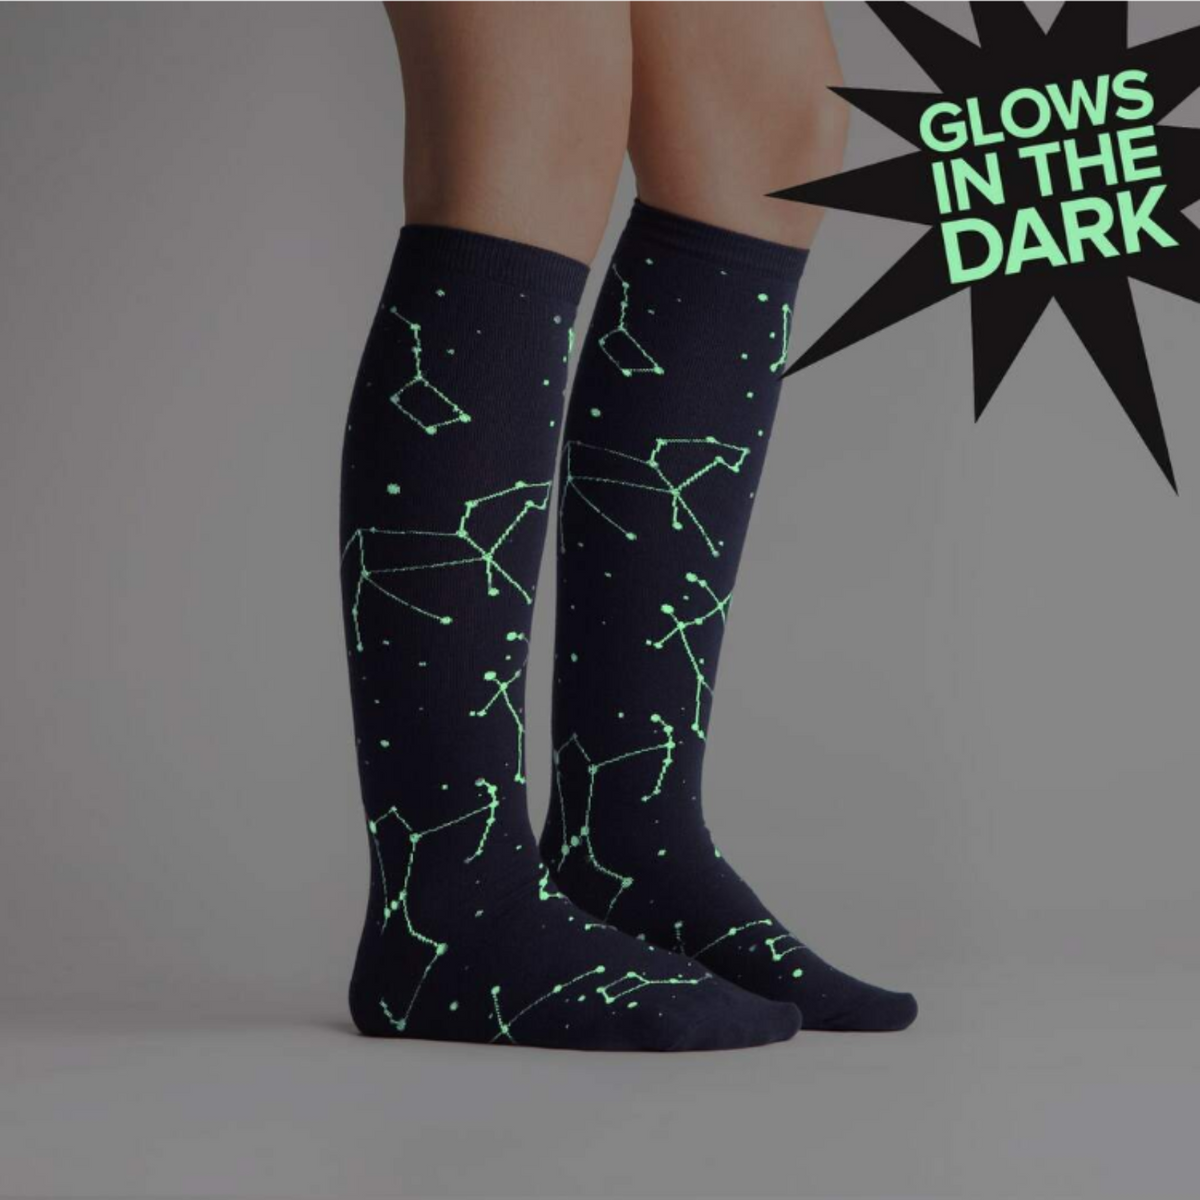 Sock It To Me Constellation (GLOWS IN THE DARK!) women&#39;s knee high sock. Featuring navy blue sock with constellations all over. Socks worn by model, socks are glowing in the dark. 